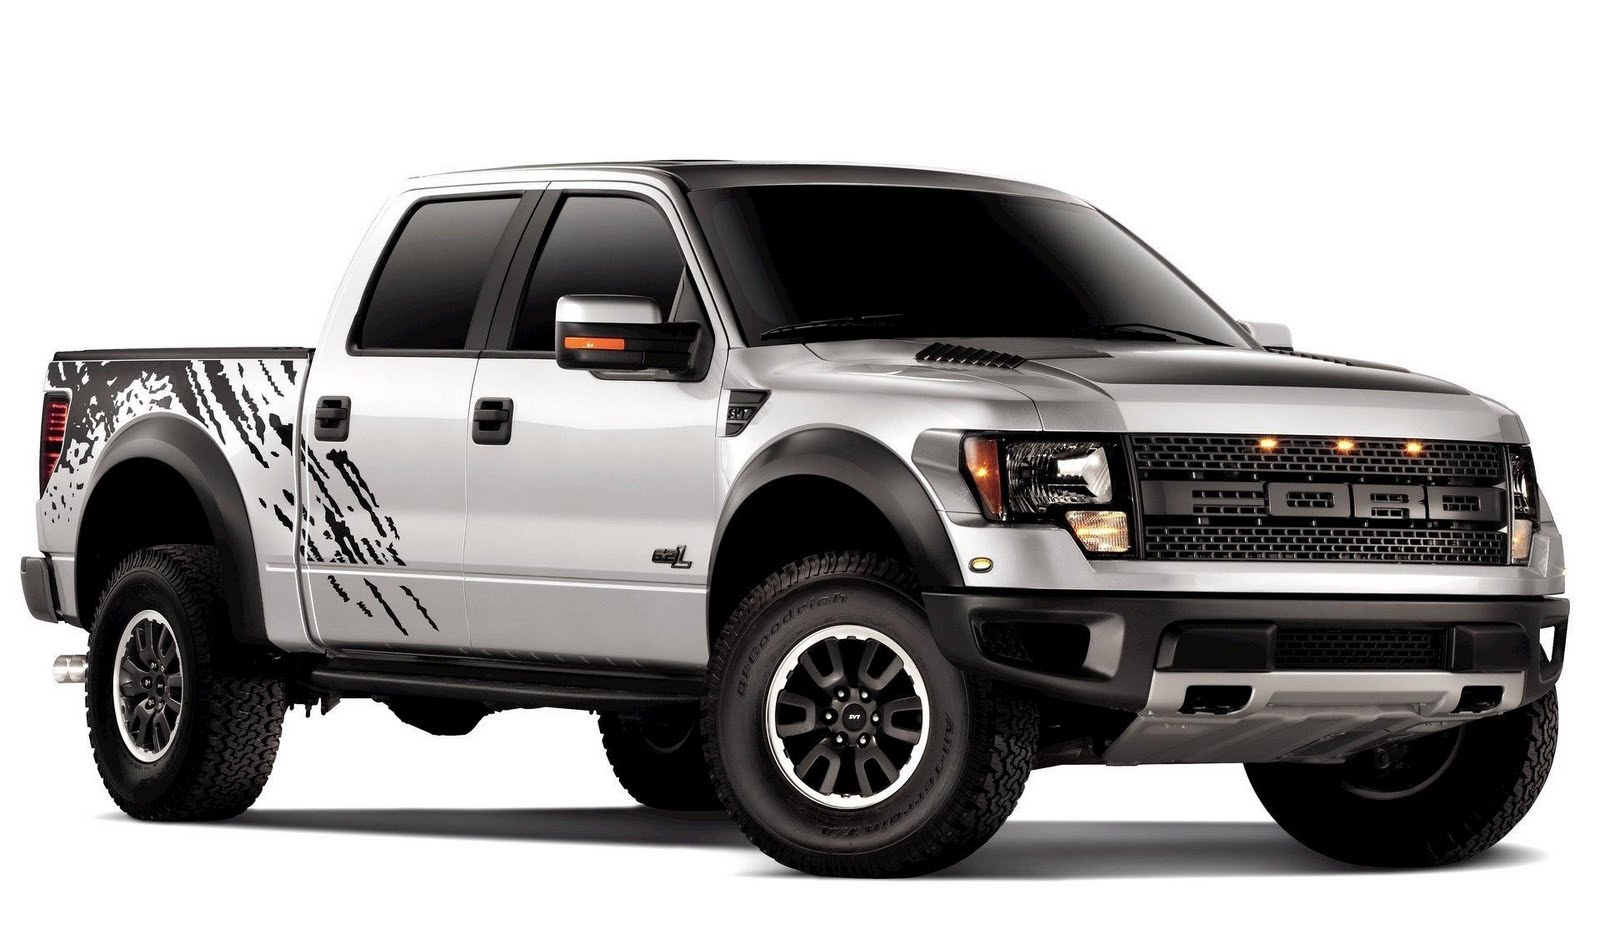 Ford Truck HD Wallpapers Ford Truck Pictures